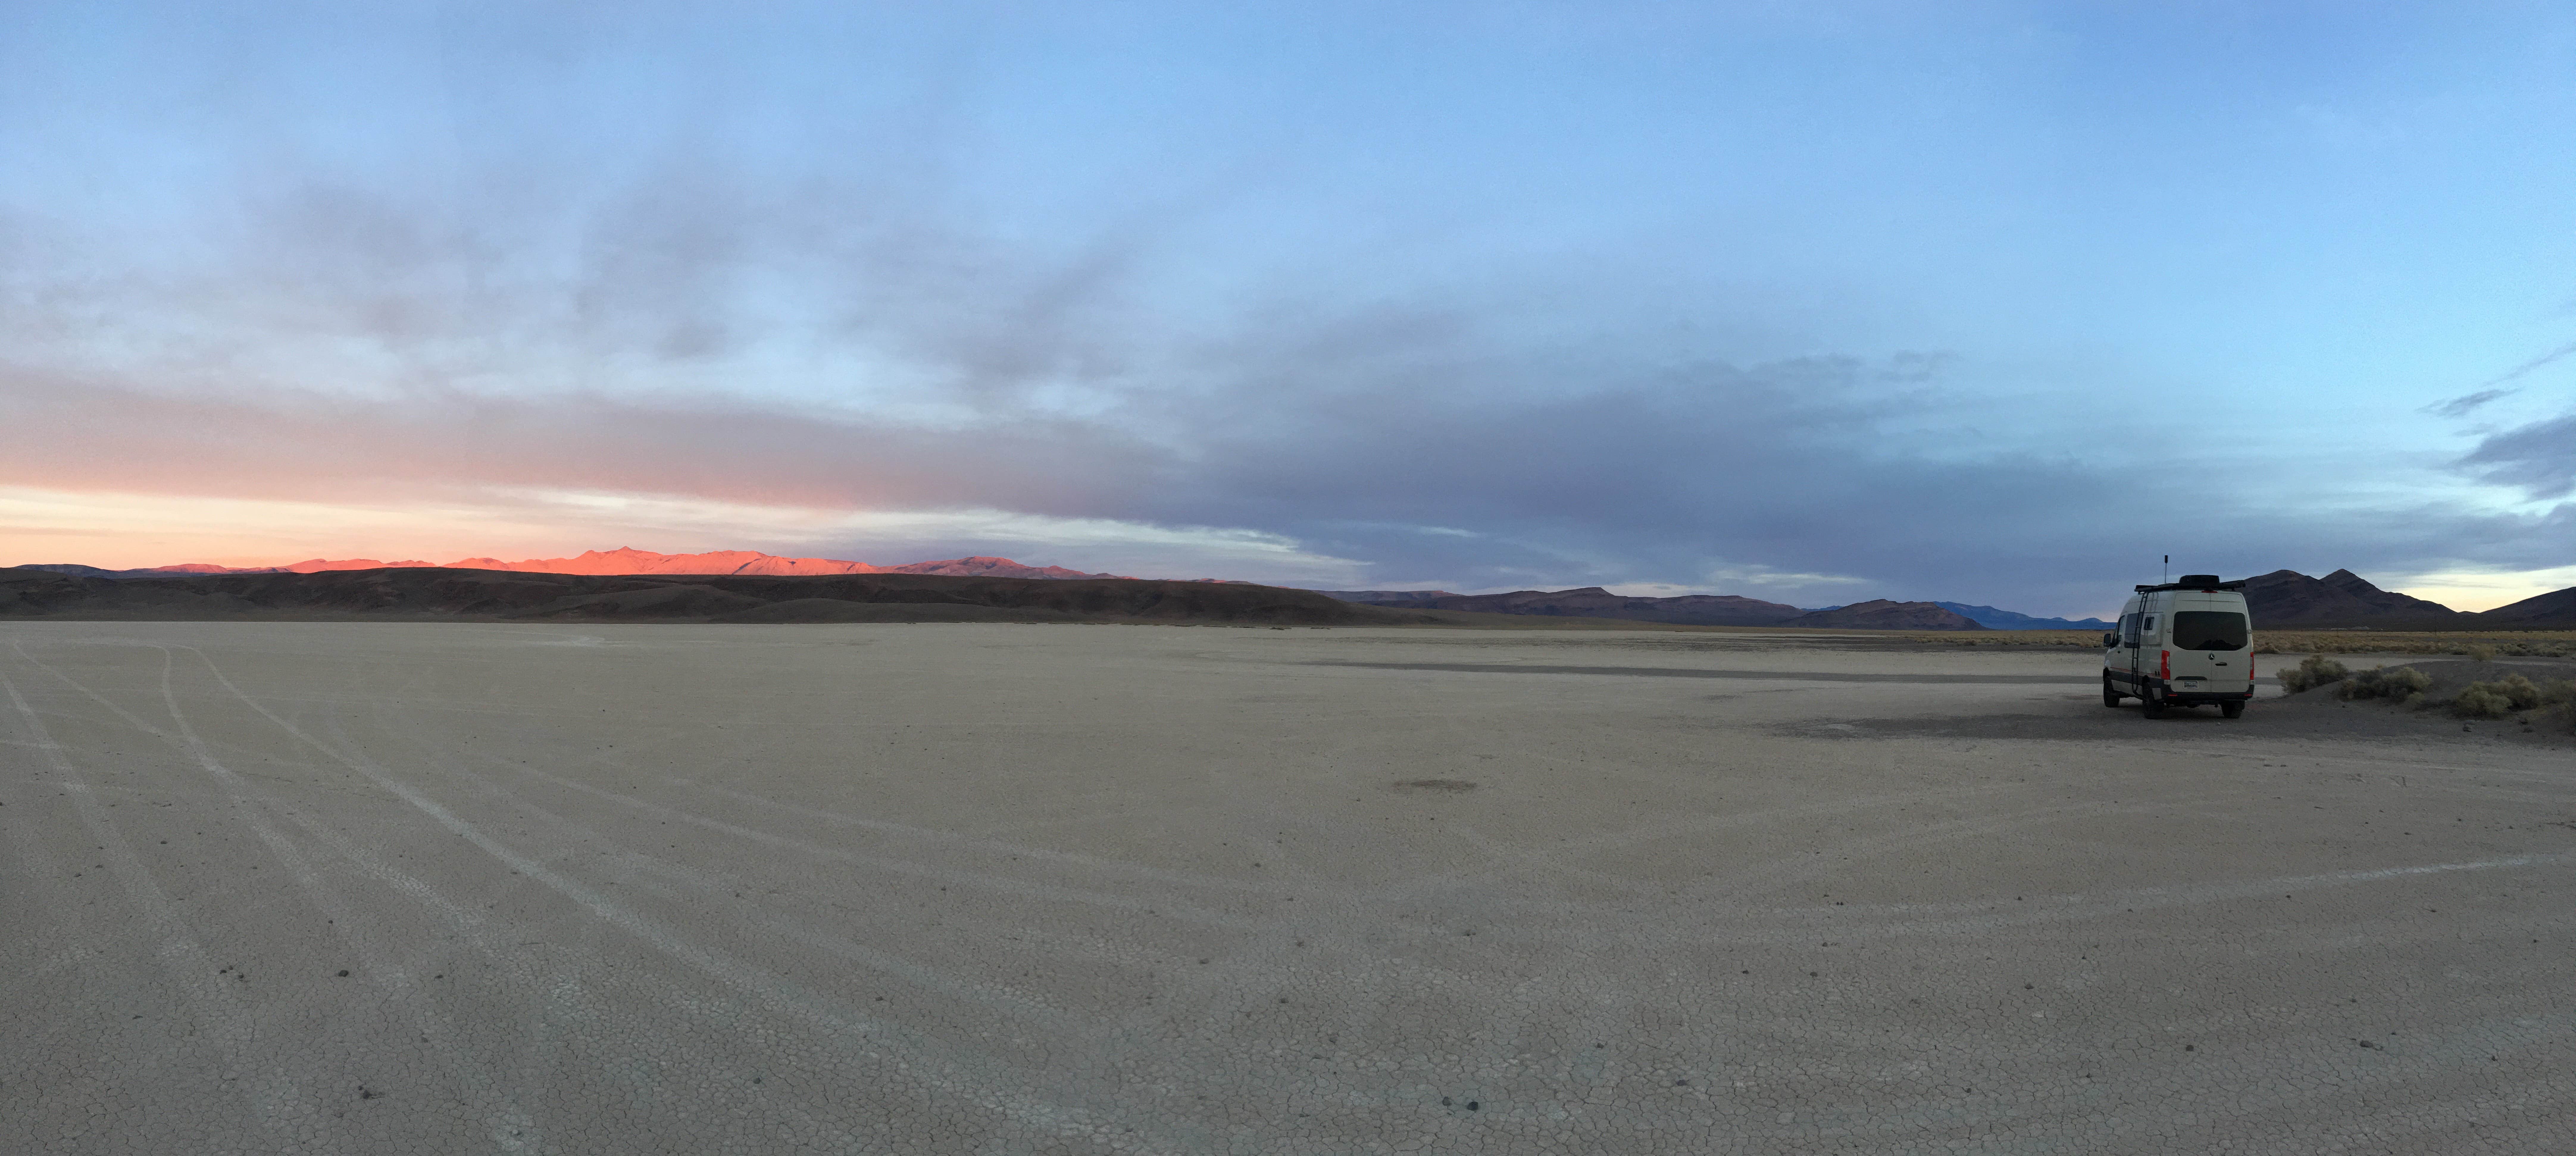 Camper submitted image from Bonnie Clair Lakebed - 3